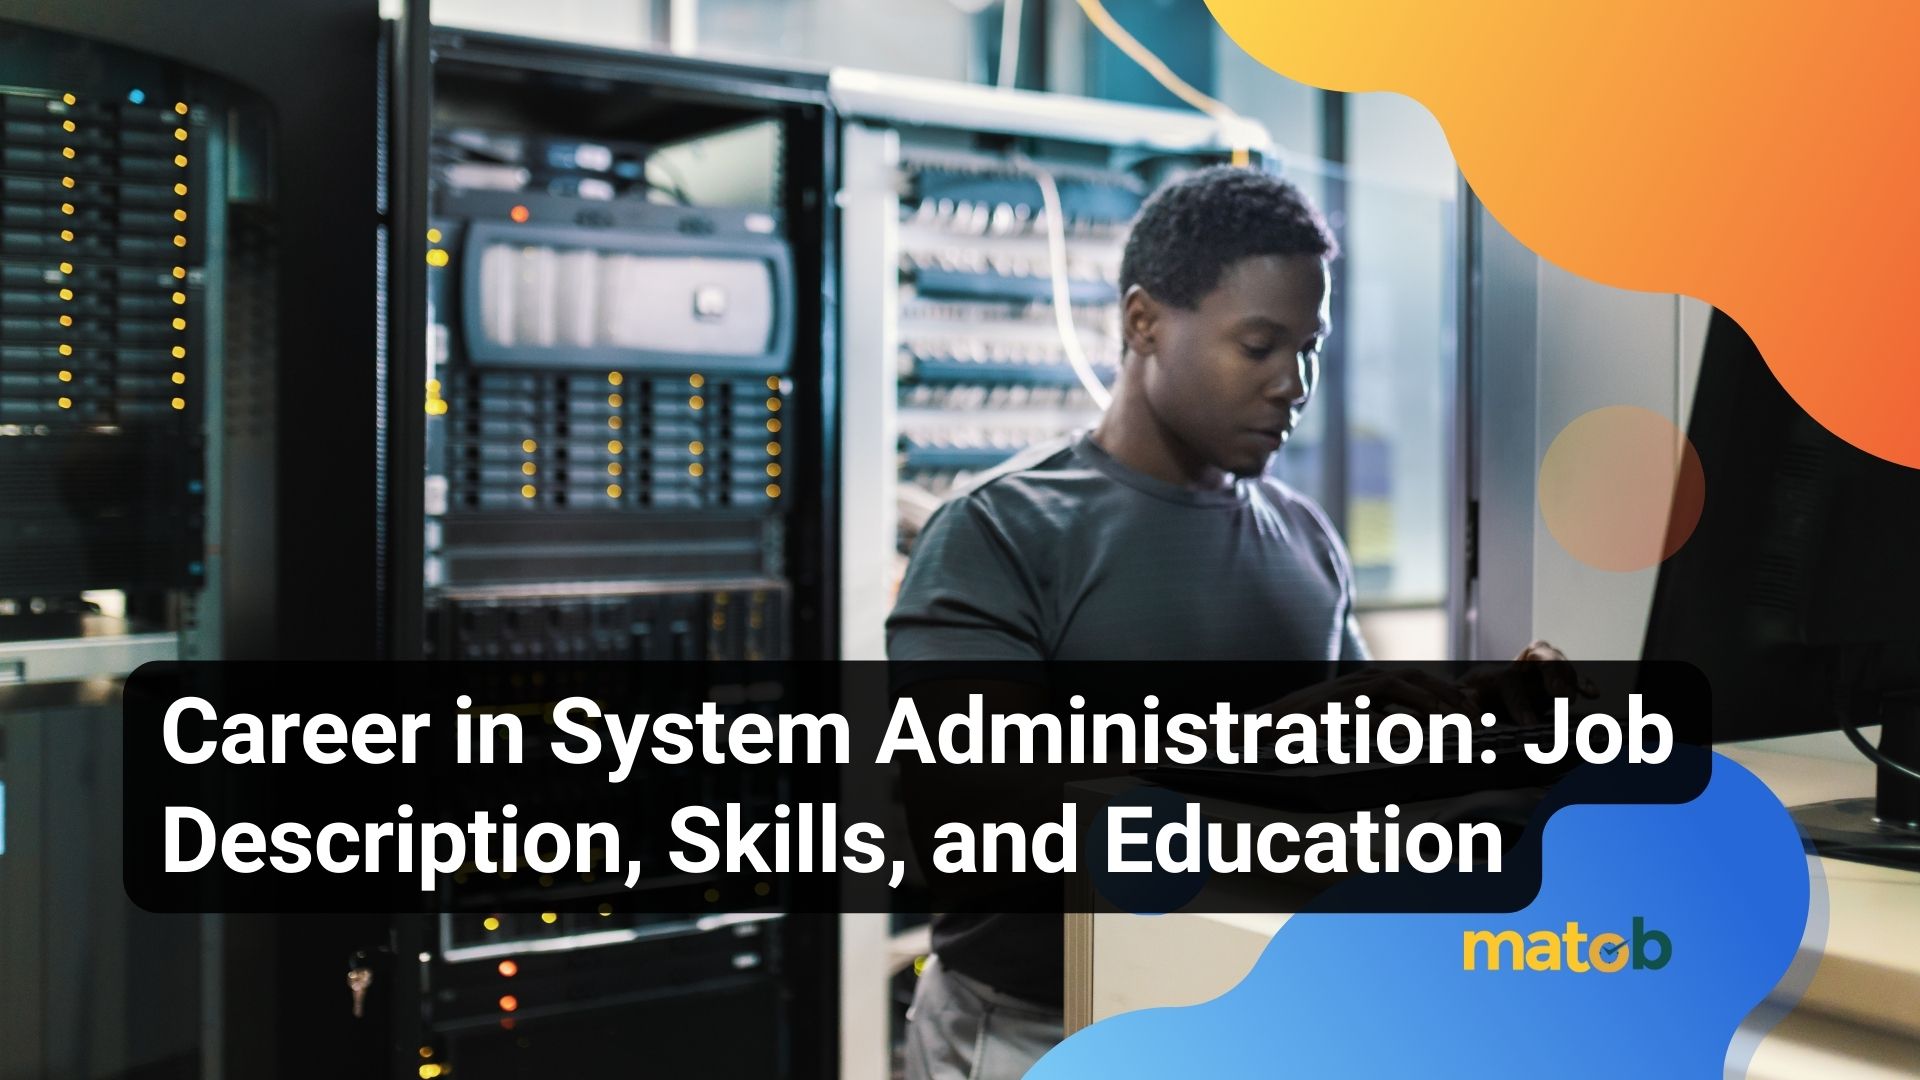 Career in System Administration: Job Description, Skills, and Education